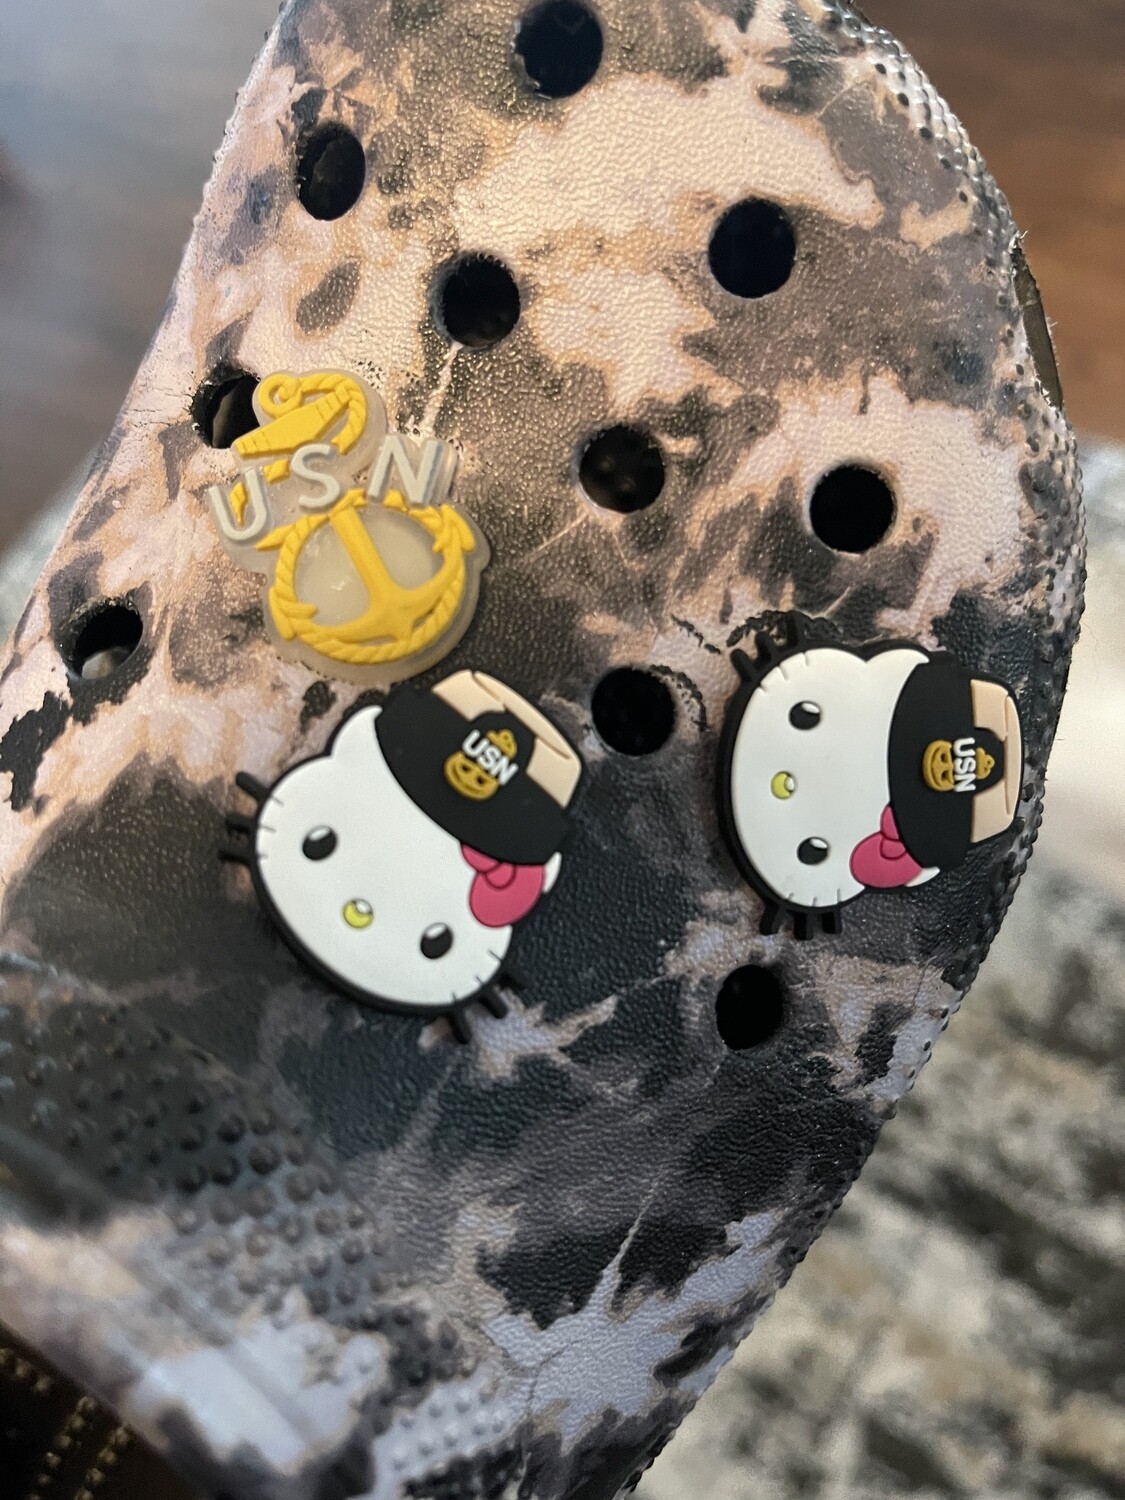 Khaki Kitty Croc Charm (4) for $15.00 including shipping